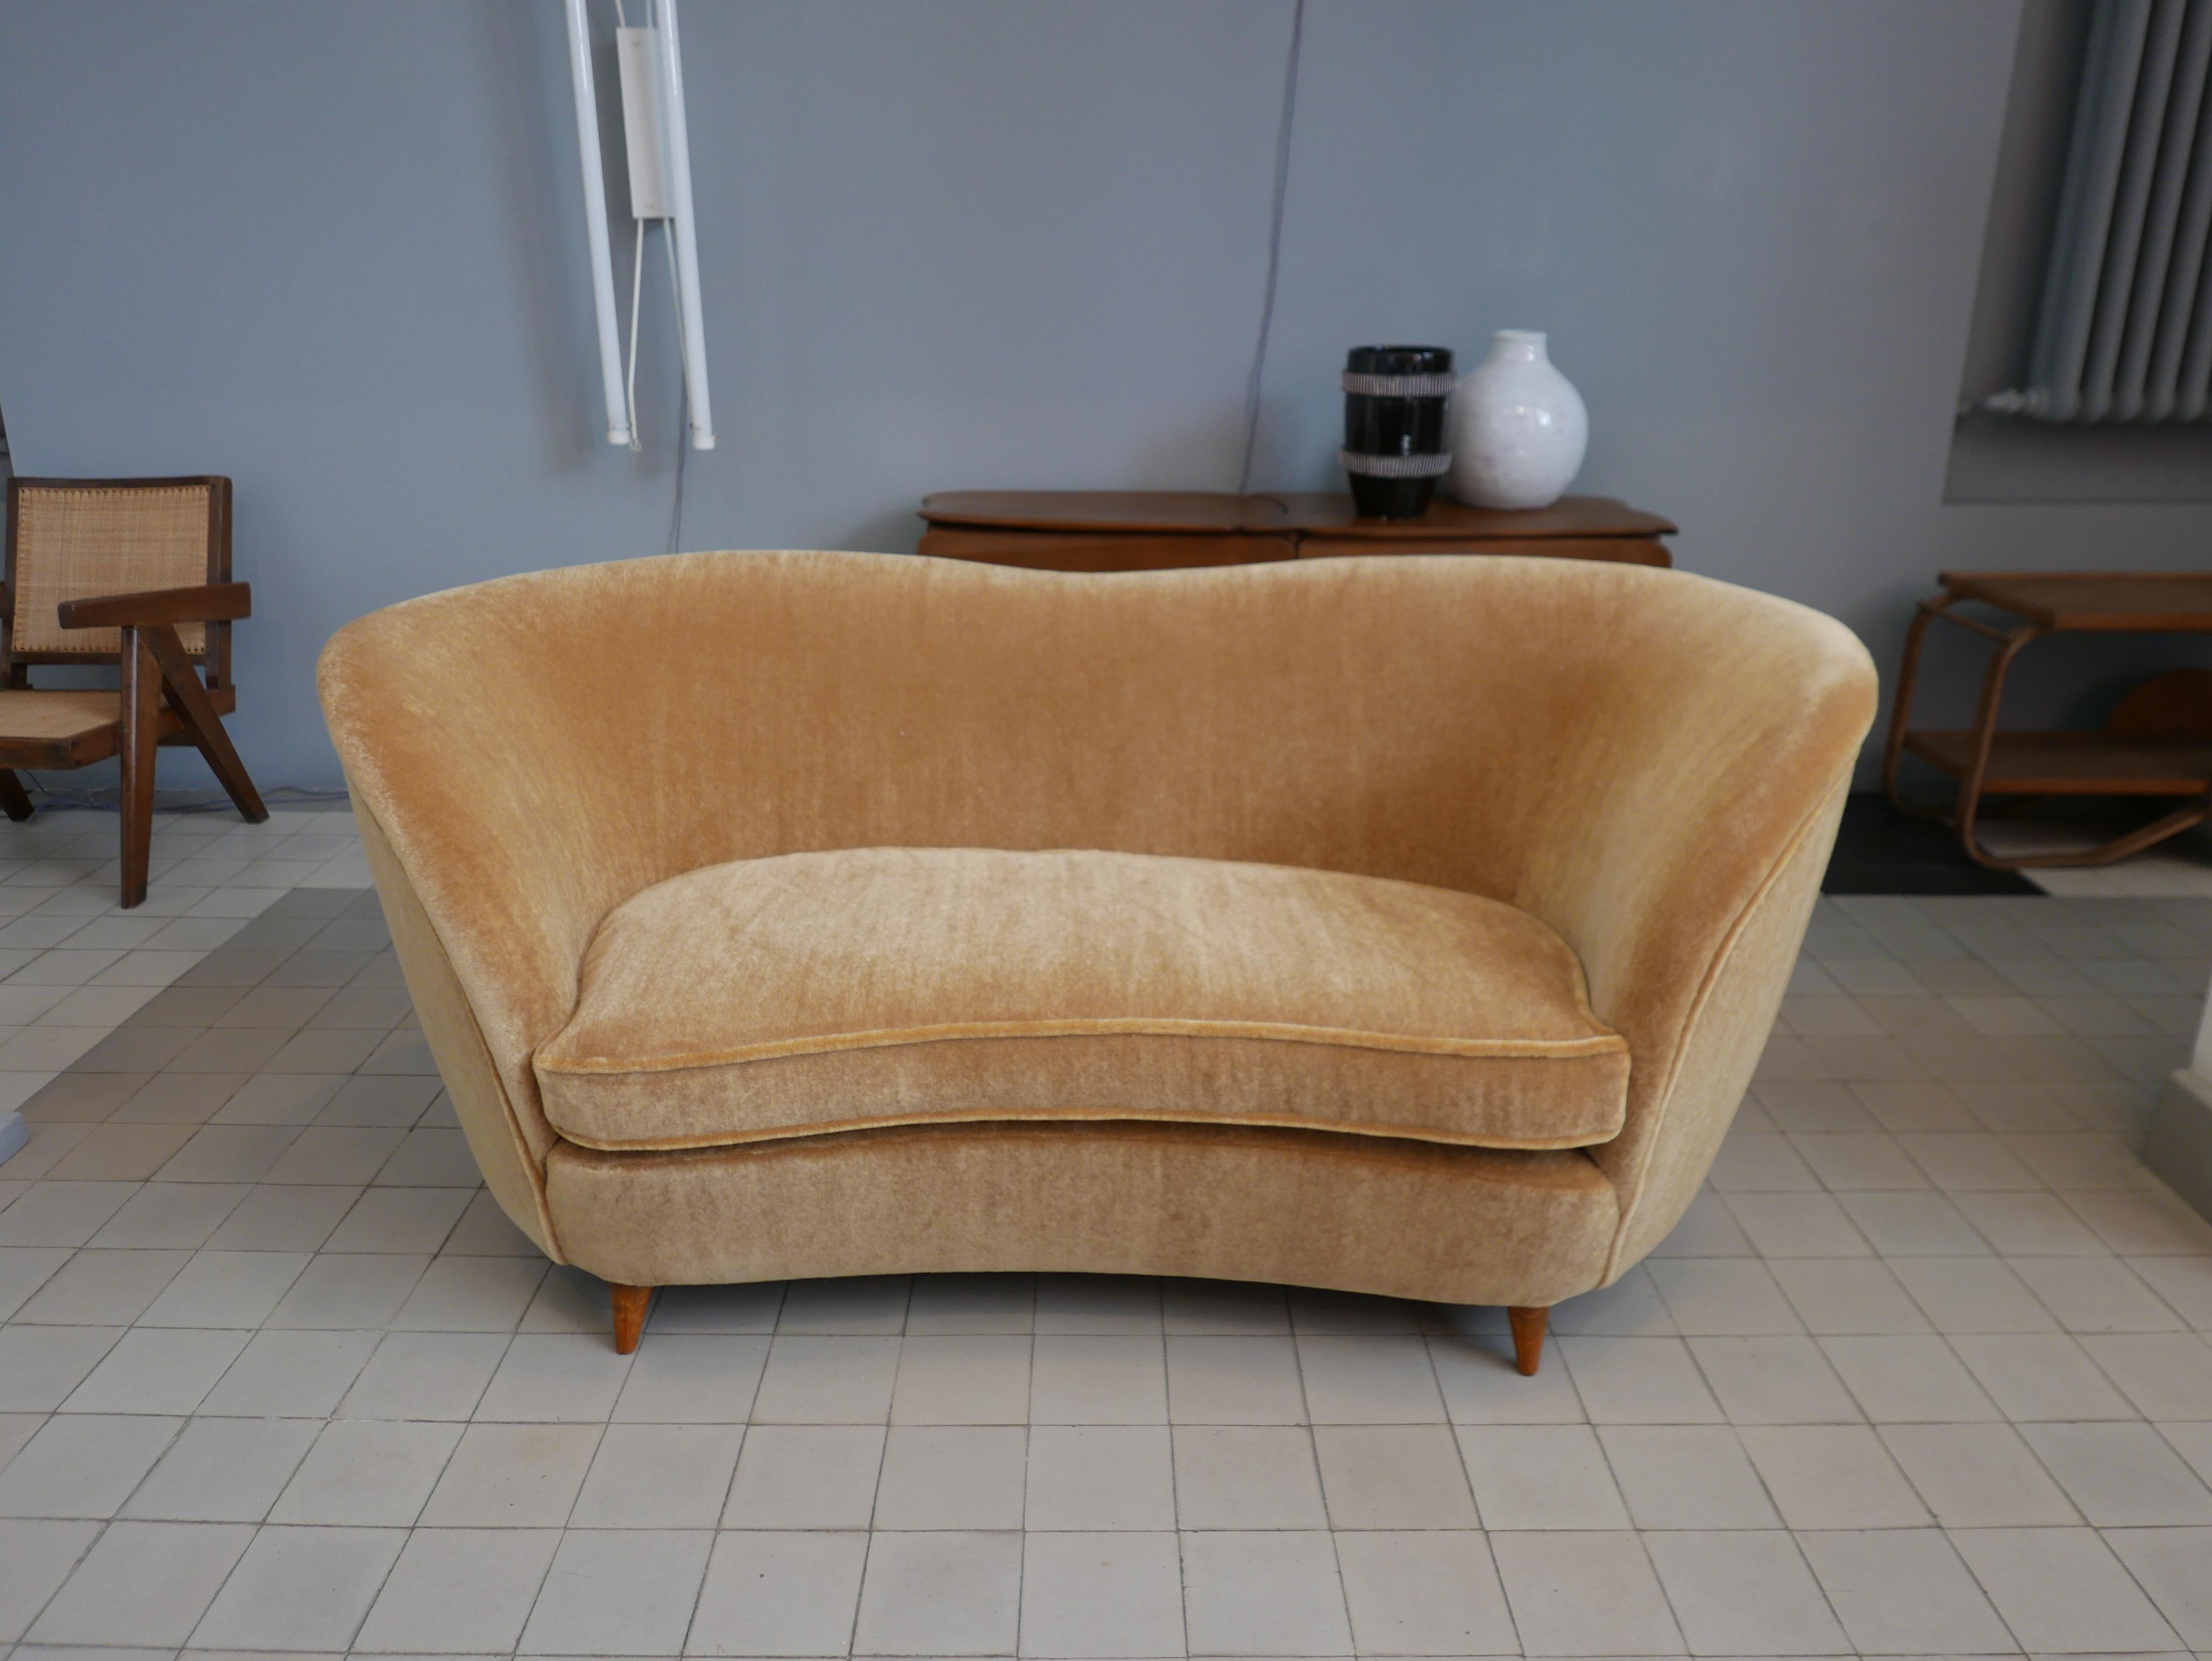 Gio Ponti, 1891-1979, 

Rare two-seat sofa, 1939. Italia
Model designed for Vanzetti home in Milan.
Wood feet tapered, upholstered with Teddy Mohair Miel by Pierre Frey, Paris.
Certificate Gio Ponti archives Expertise 16079/000 

 